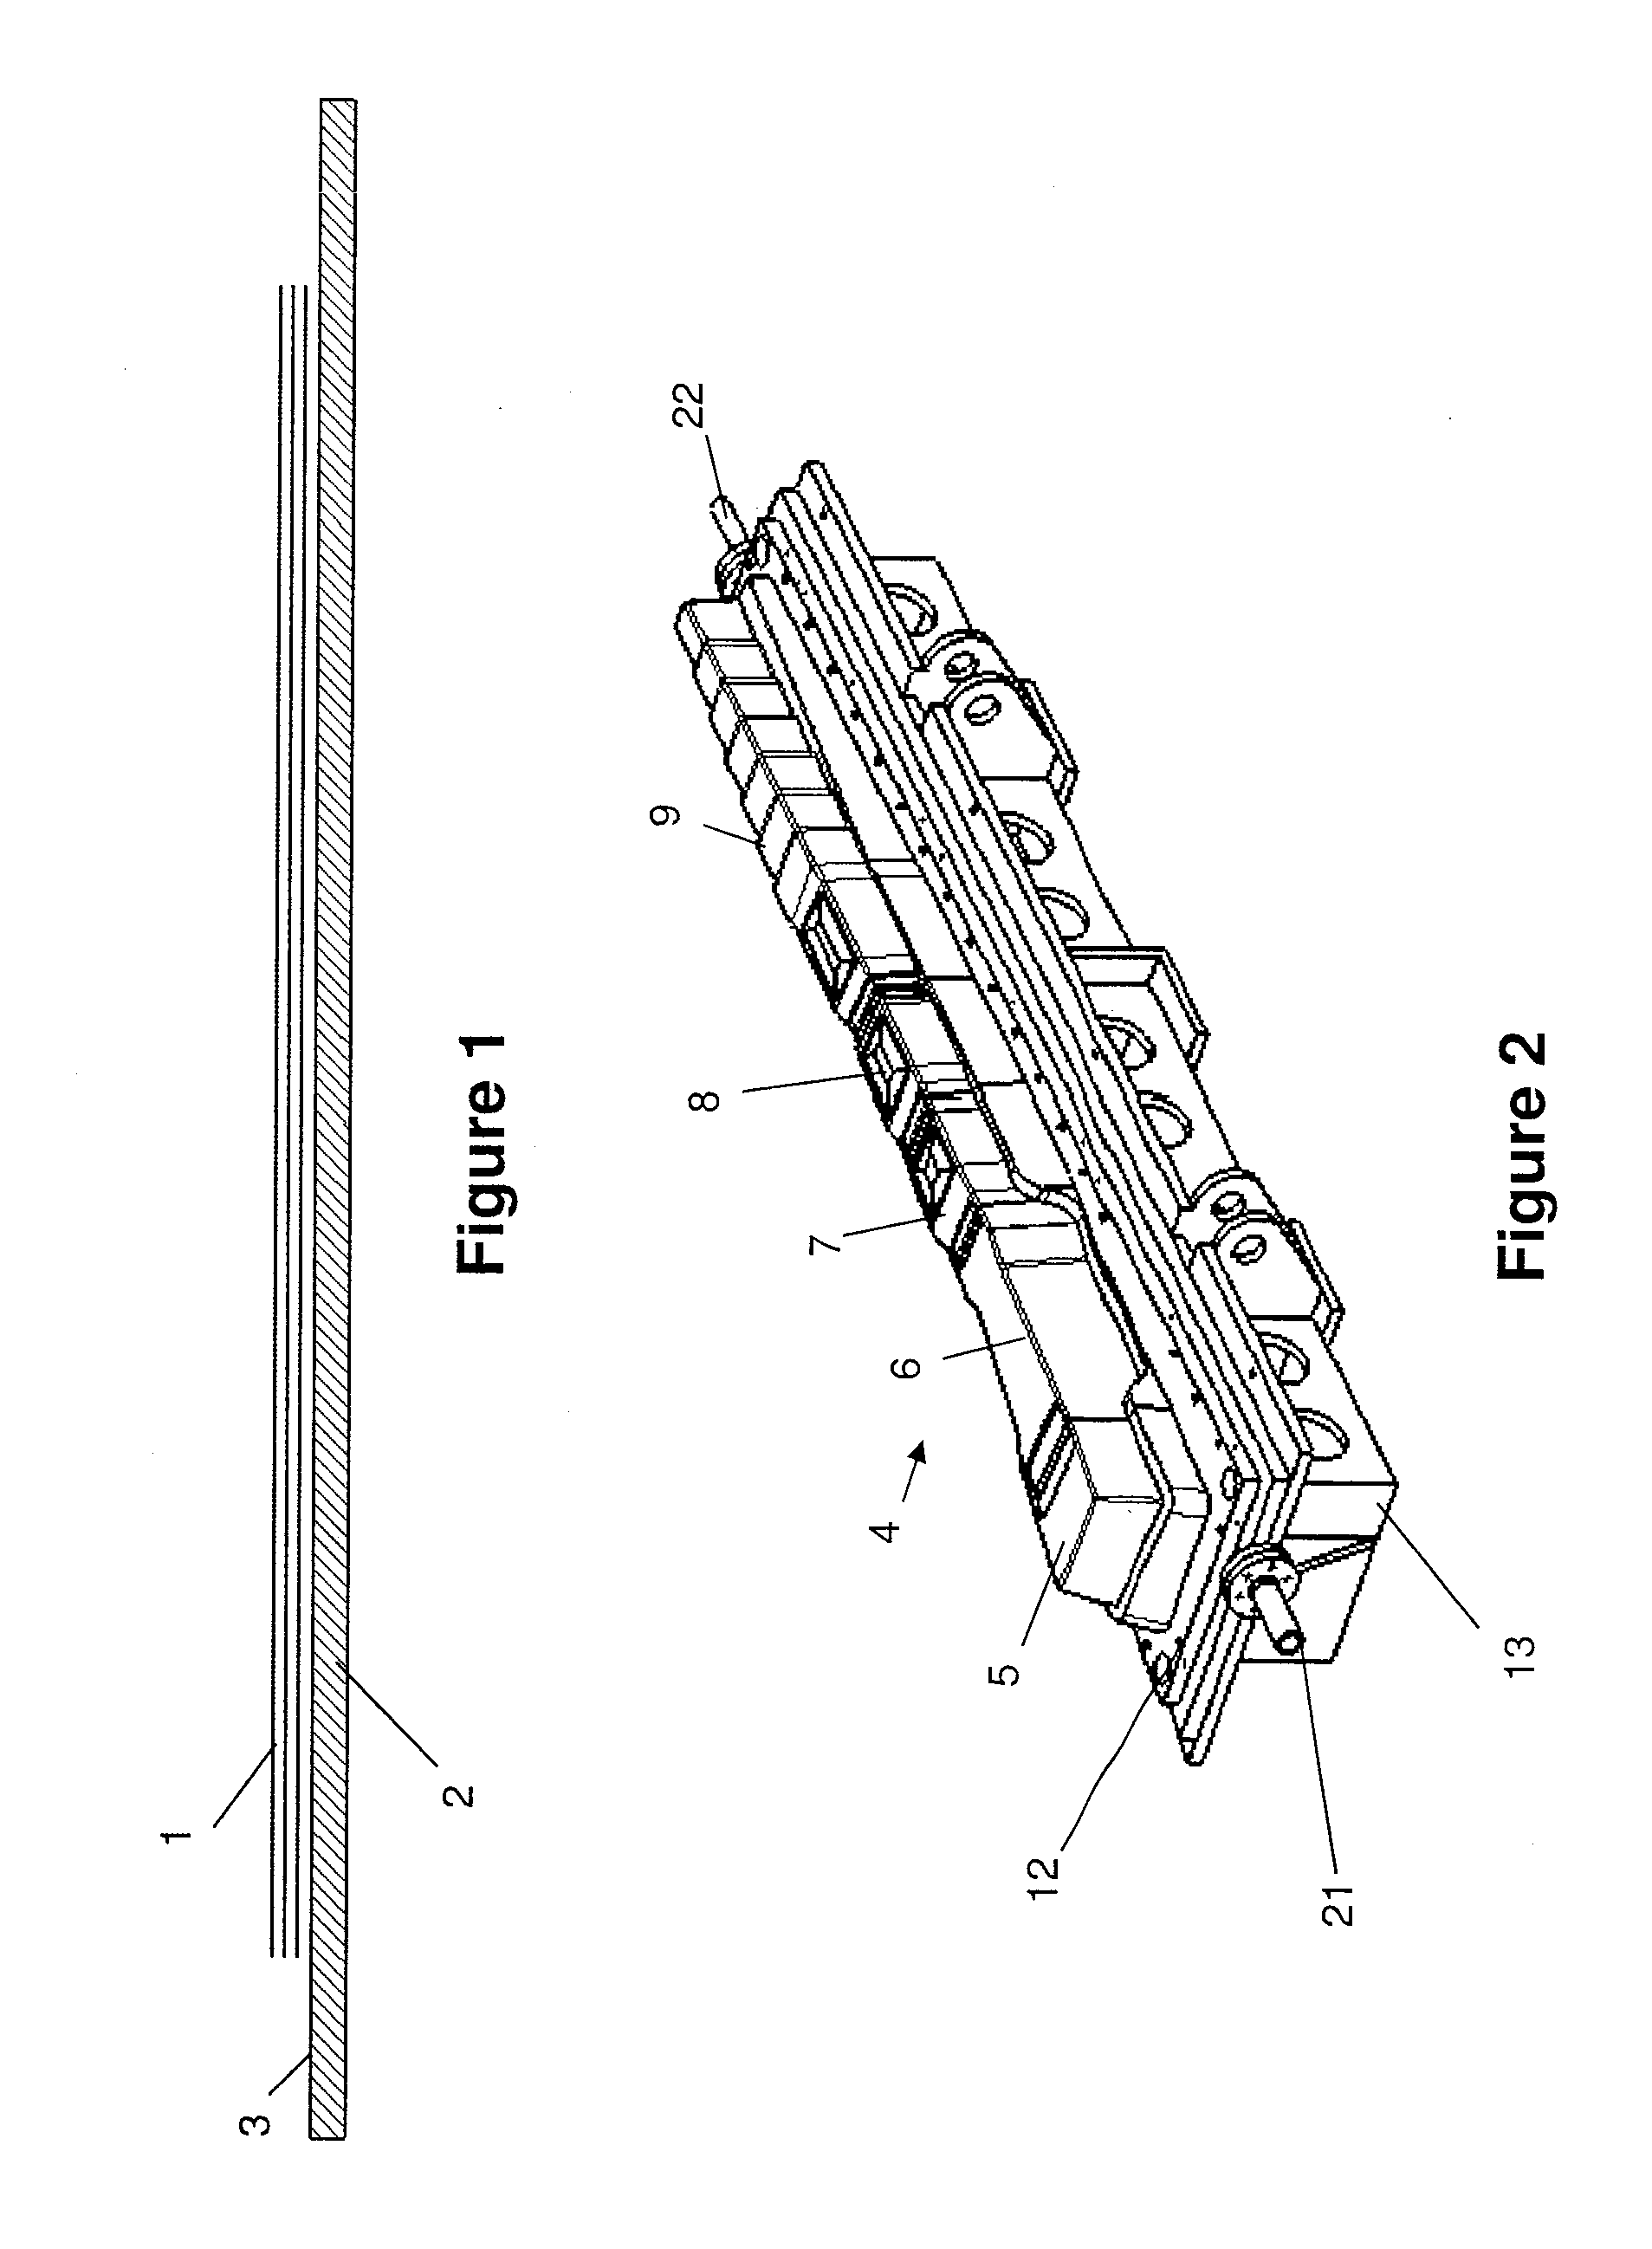 Method of manufacturing a composite element